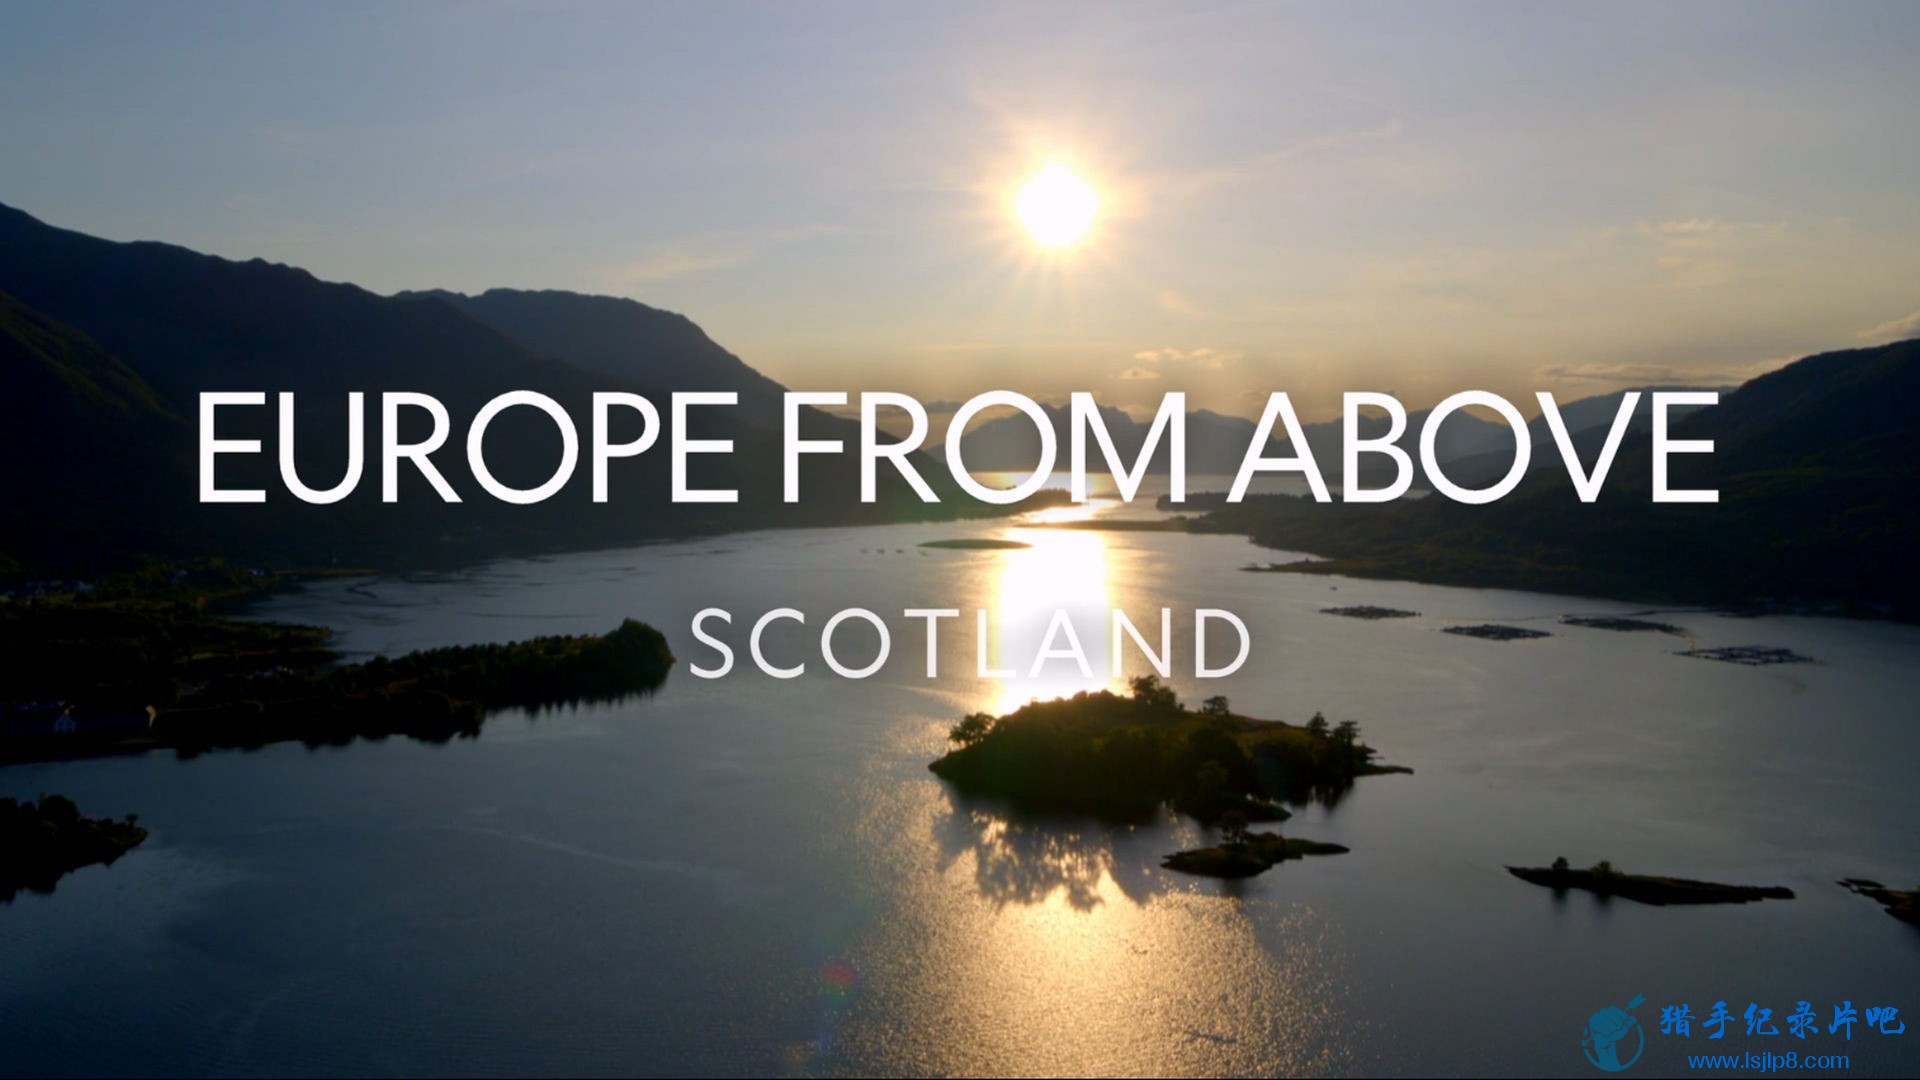 Europe.From.Above.S04E01.Scotland.1080p.DSNP.WEB-DL.DD 5.1.H.264-NTb.1.jpg